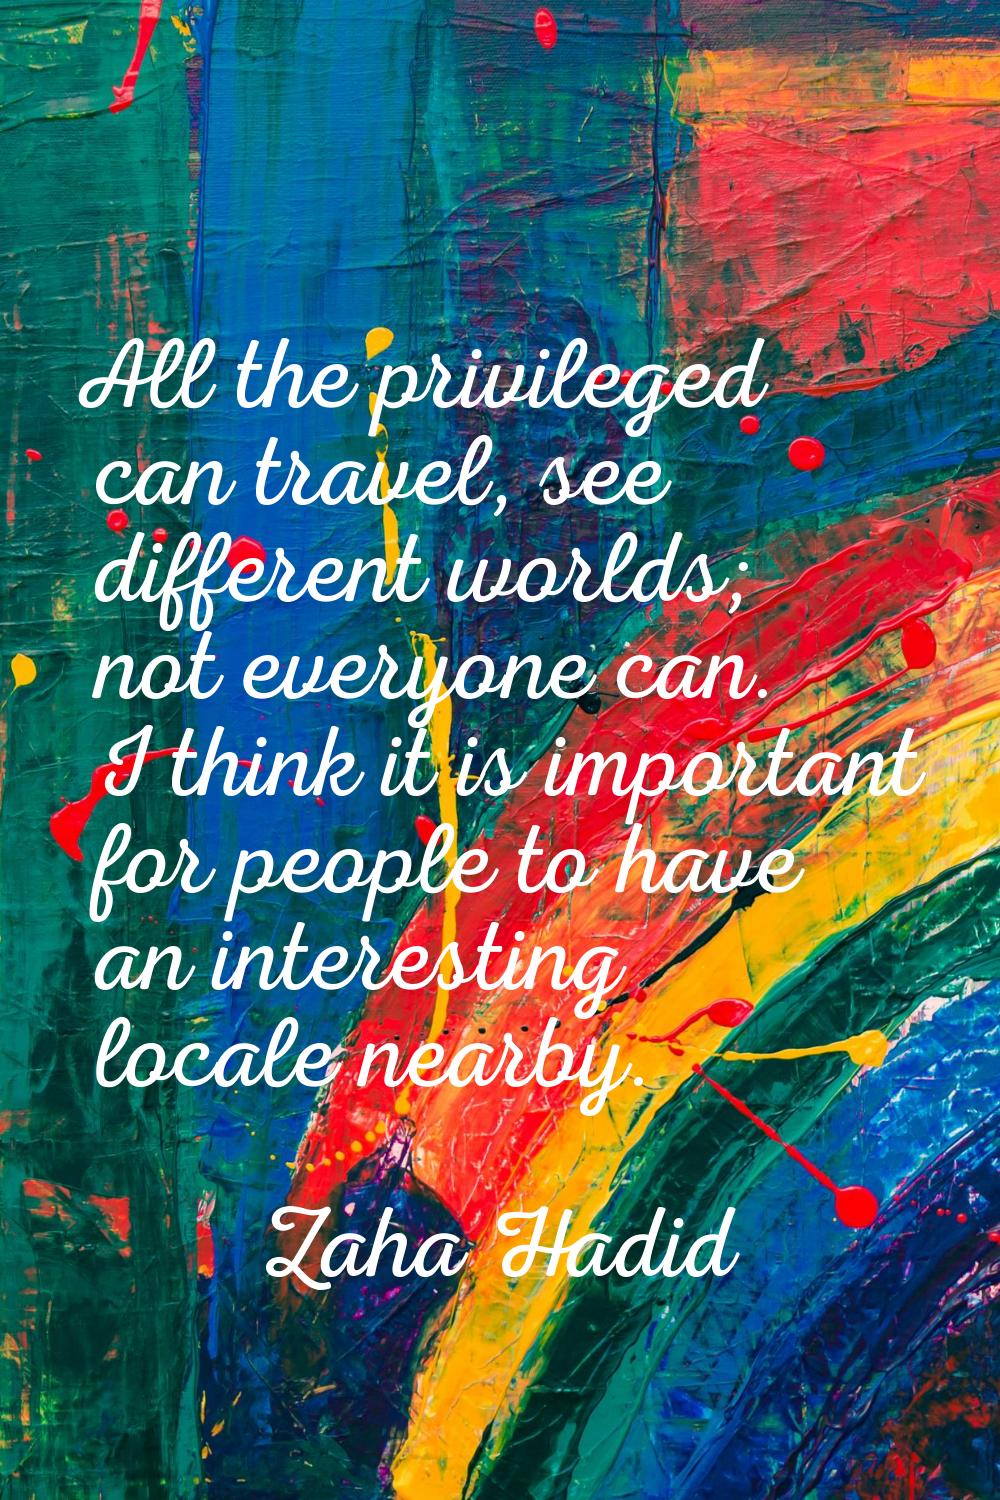 All the privileged can travel, see different worlds; not everyone can. I think it is important for 